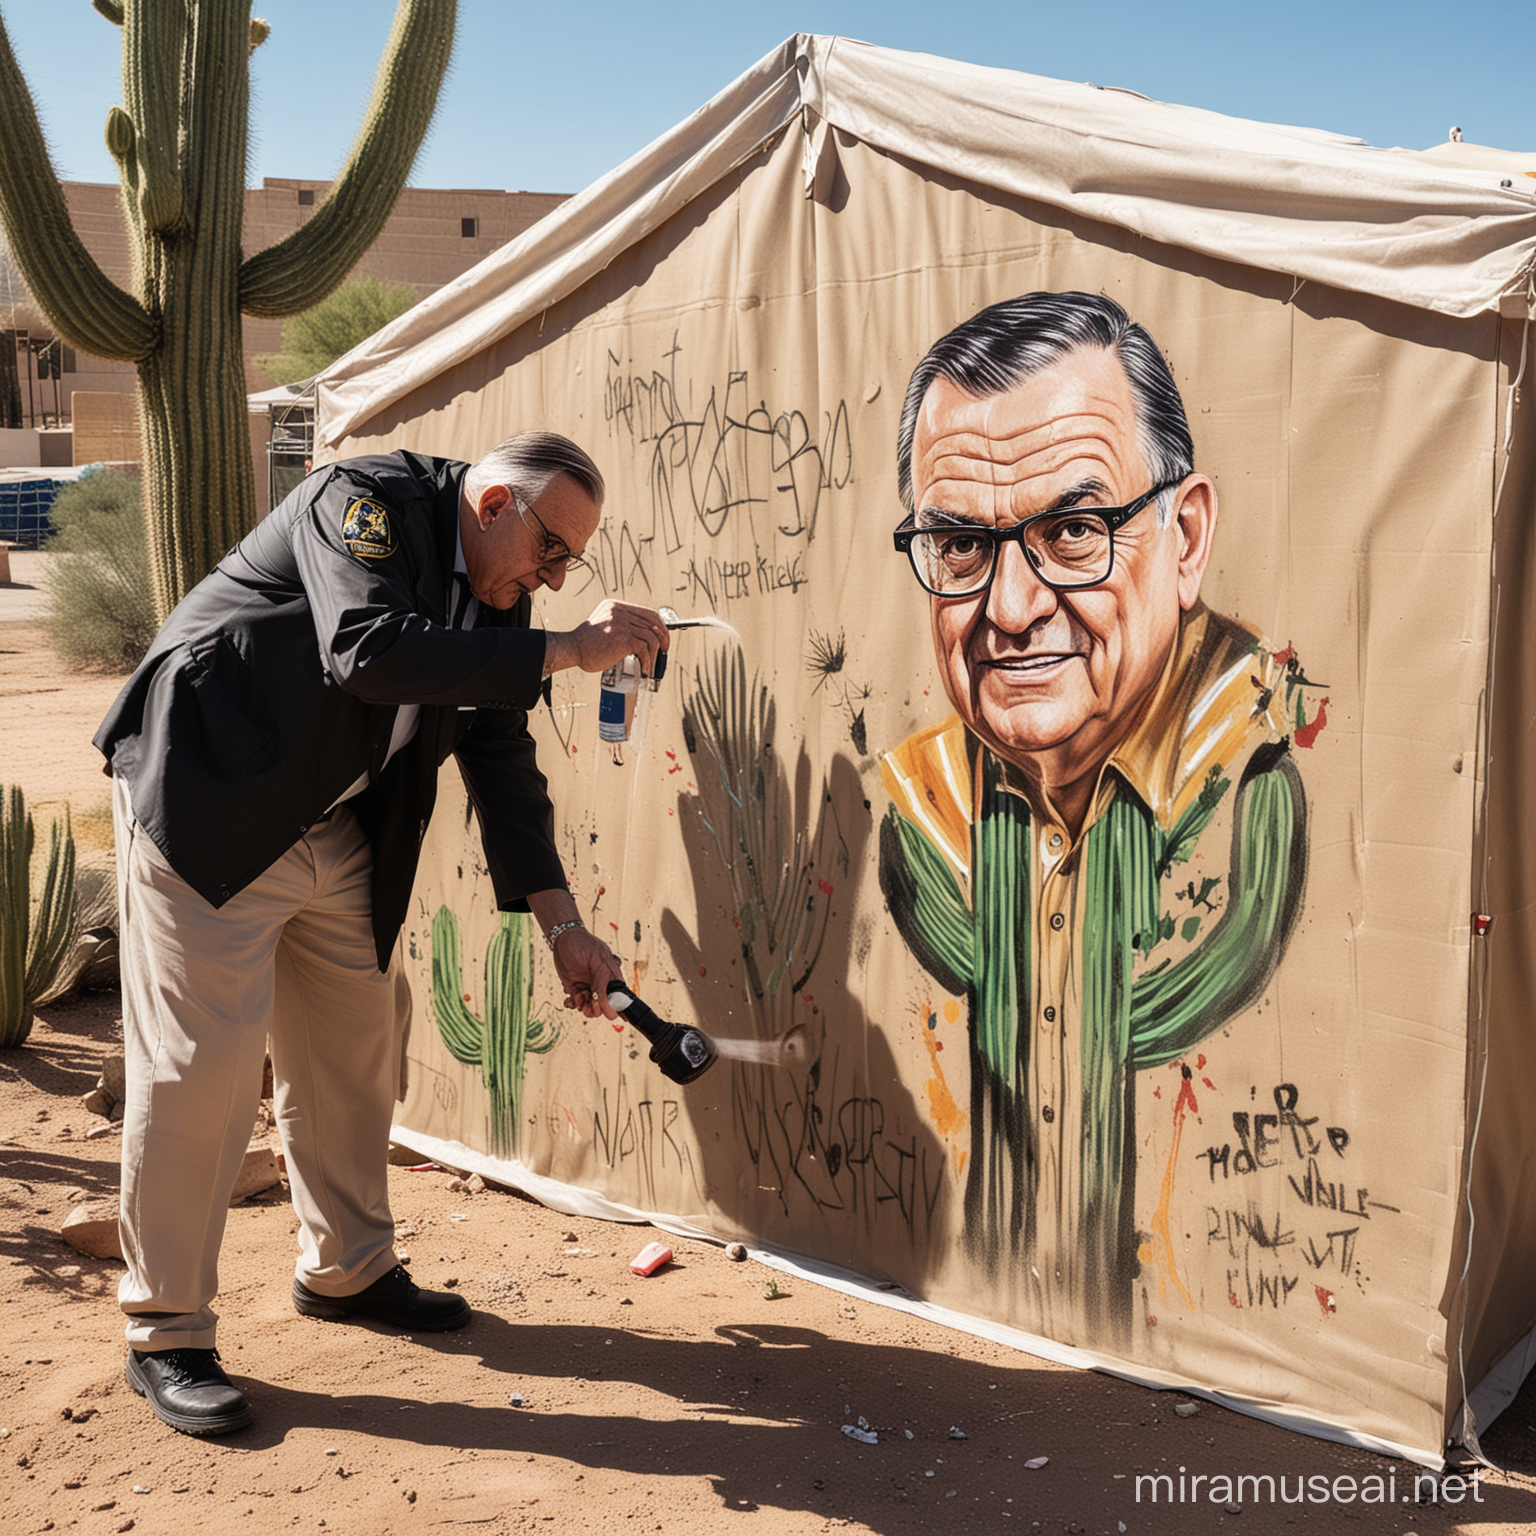 Sheriff Joe Arpaio spray painting graffiti on a wall next to a tent and a cactus


